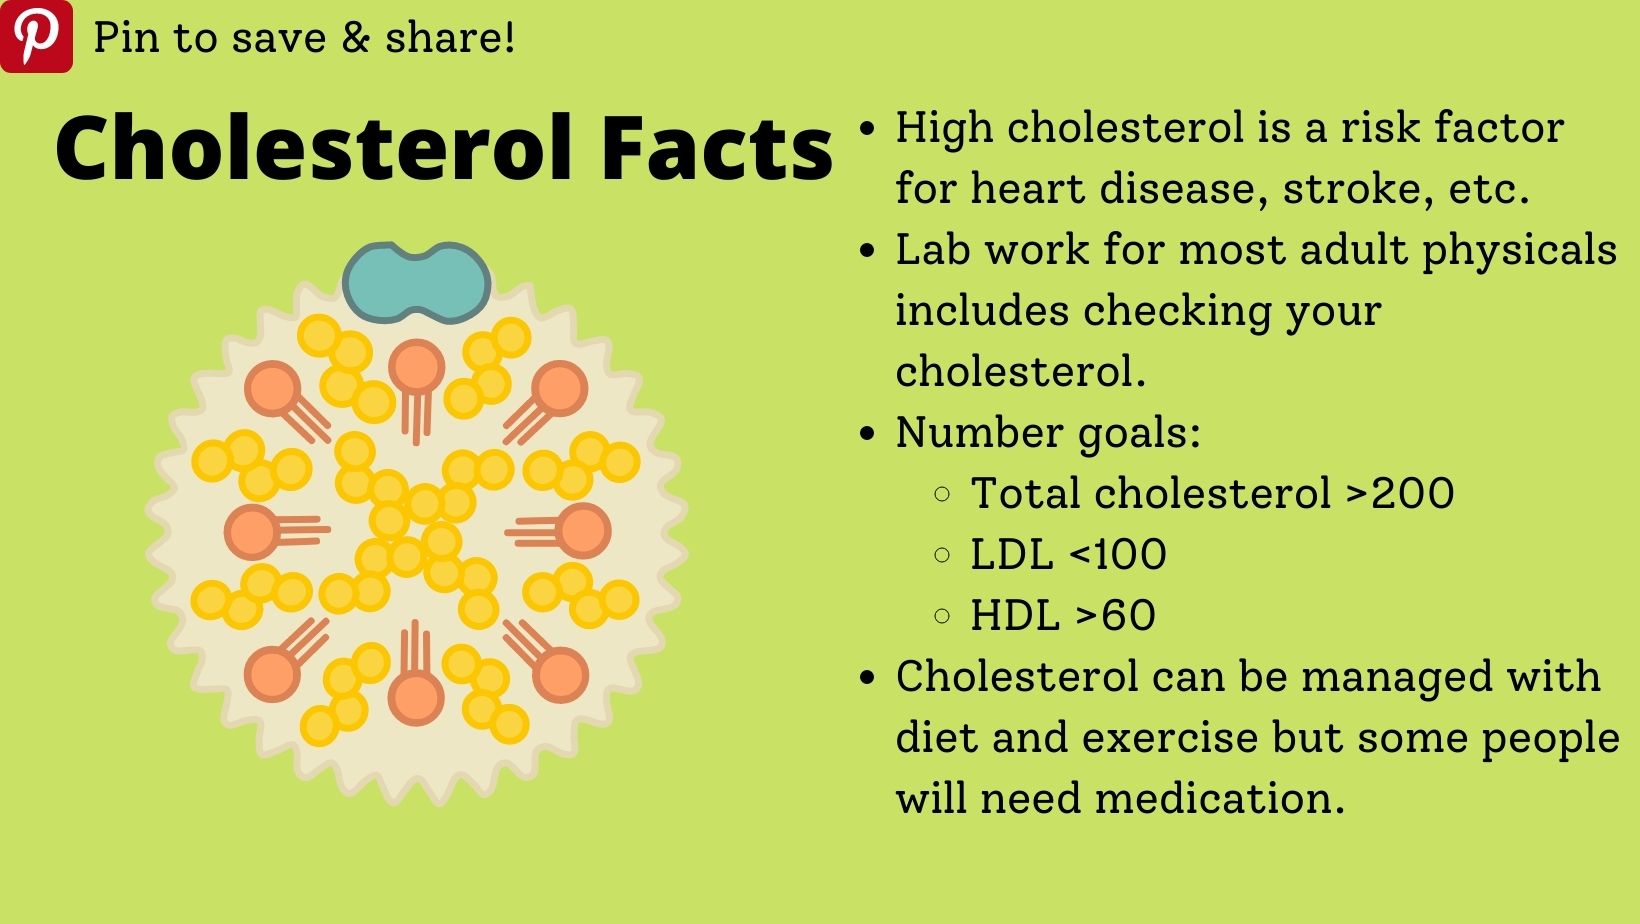 cholesterol infographic with information on what cholesterol values are and how to improve them